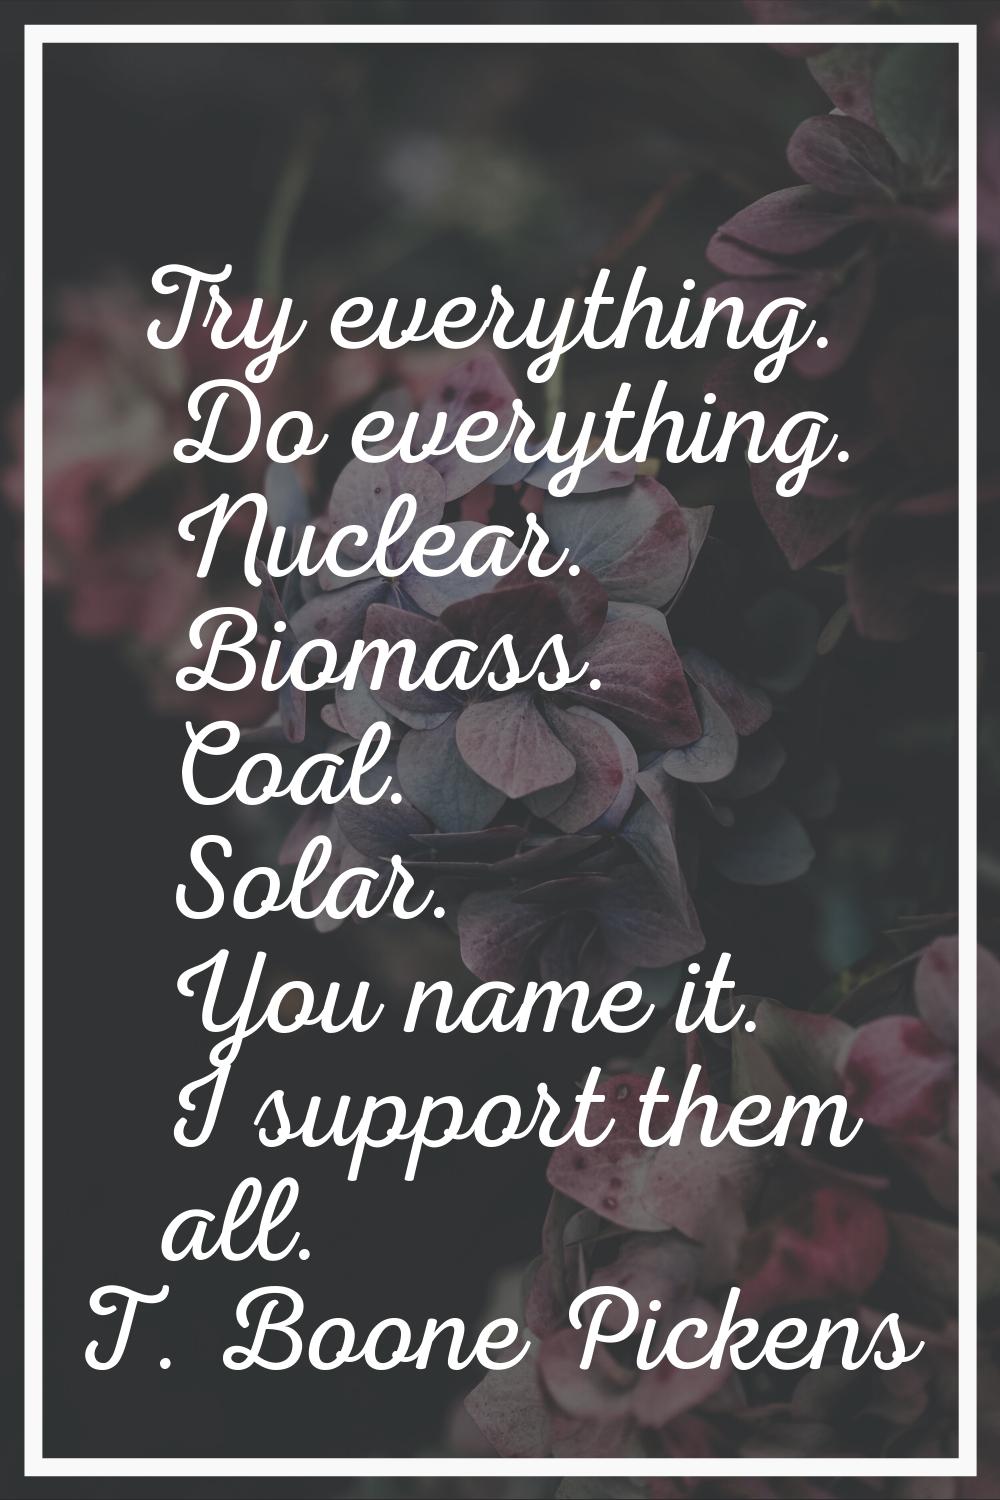 Try everything. Do everything. Nuclear. Biomass. Coal. Solar. You name it. I support them all.